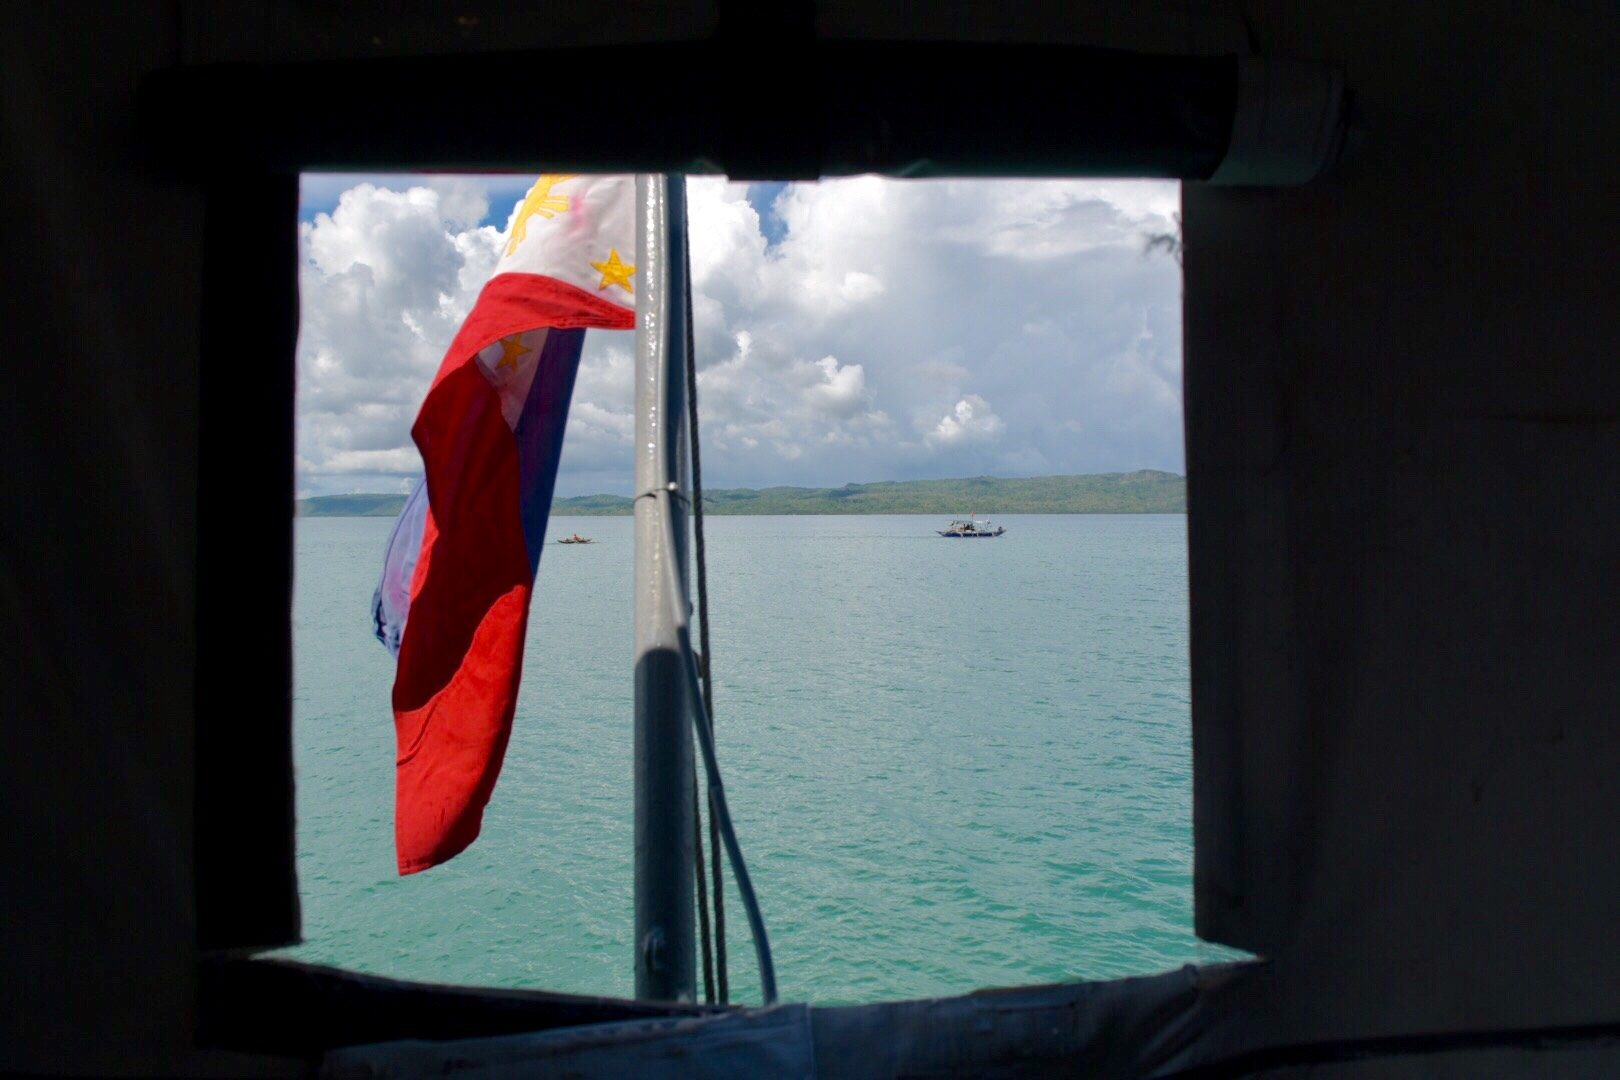 Sovereignty vs sovereign rights: What do we have in West PH Sea?